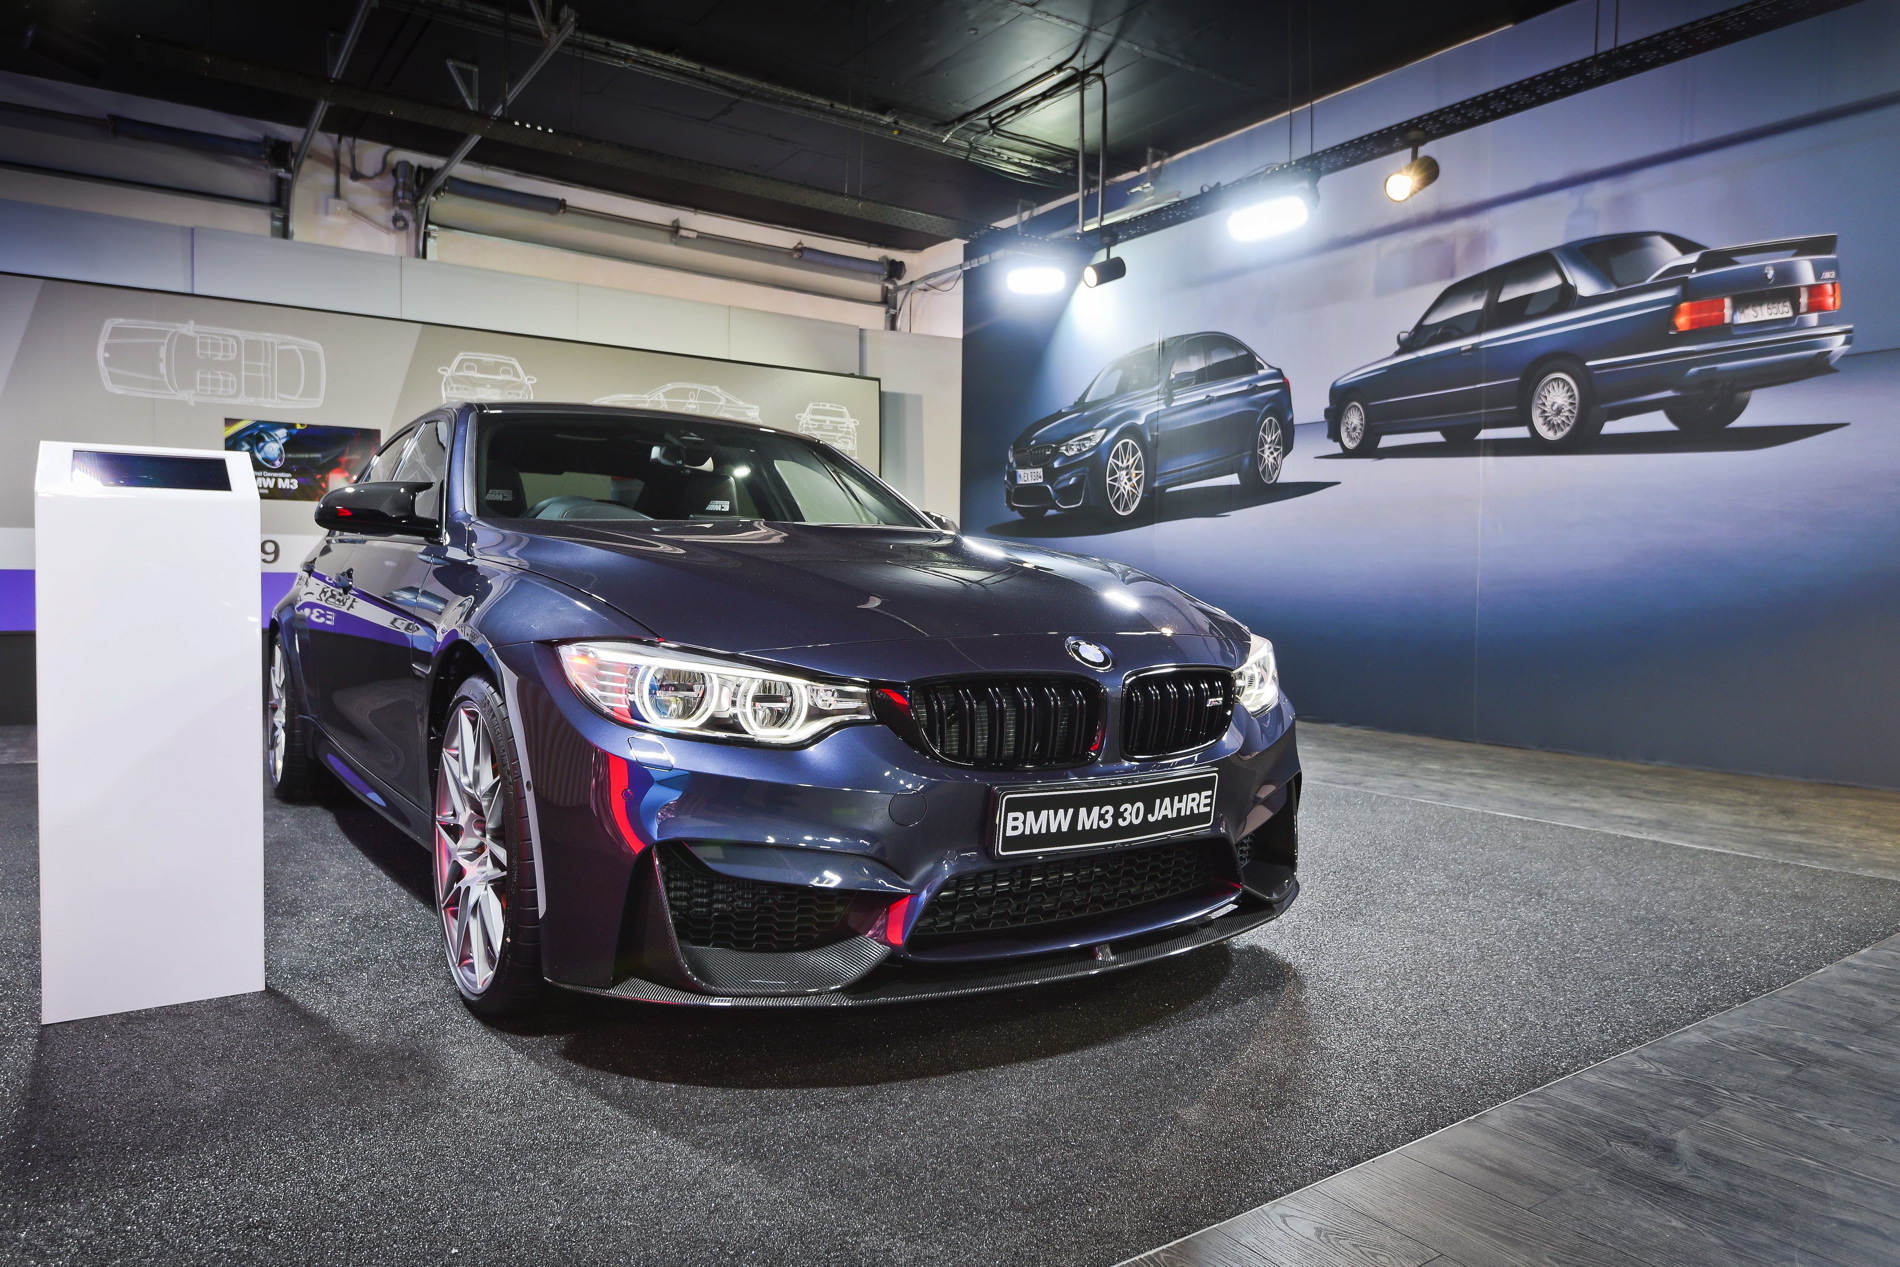 Exclusive BMW M3 “30 Jahre” Arrives in South Africa